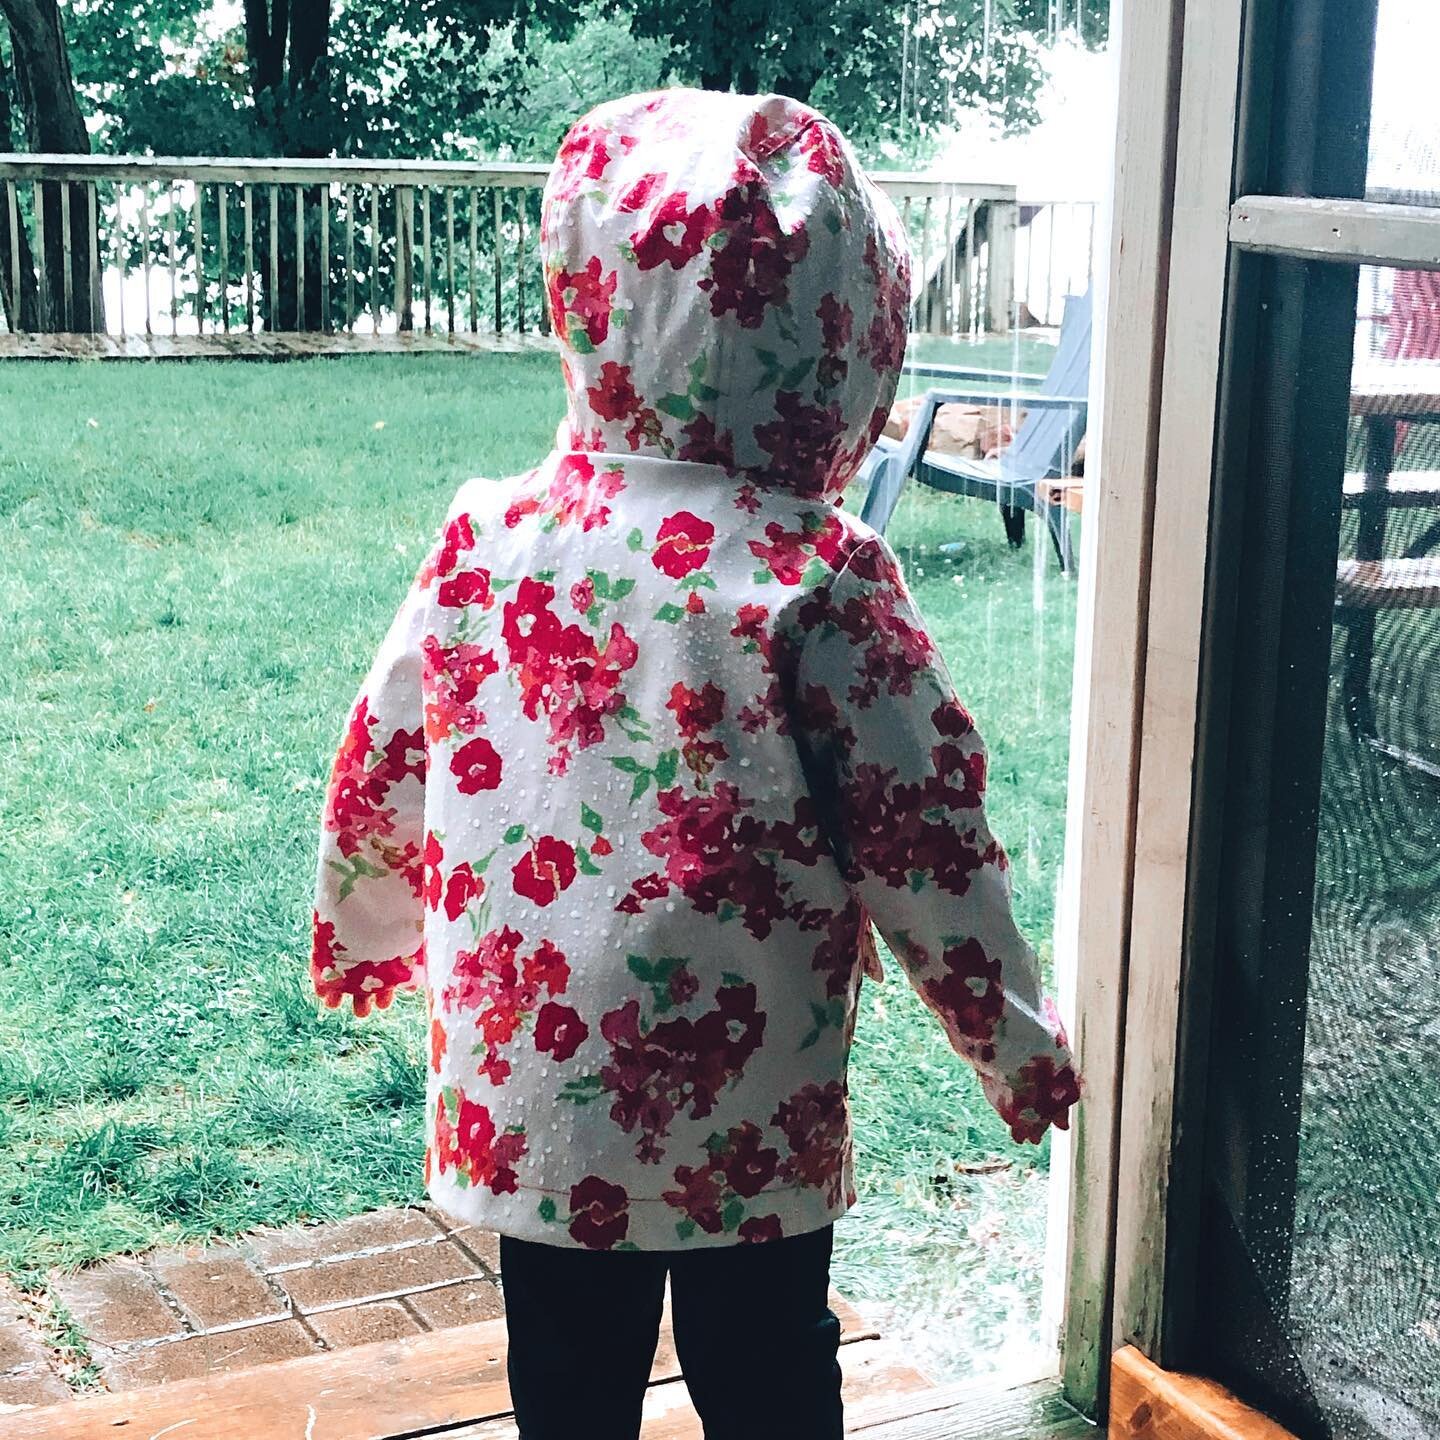 Posting this as a reminder to dance in the rain rather than whine about it! 🌧 

It&rsquo;s the first rainy afternoon of our cottage week and my husband I were struggling to think of something to do with the girls. We tried dancing, bubbles and even 